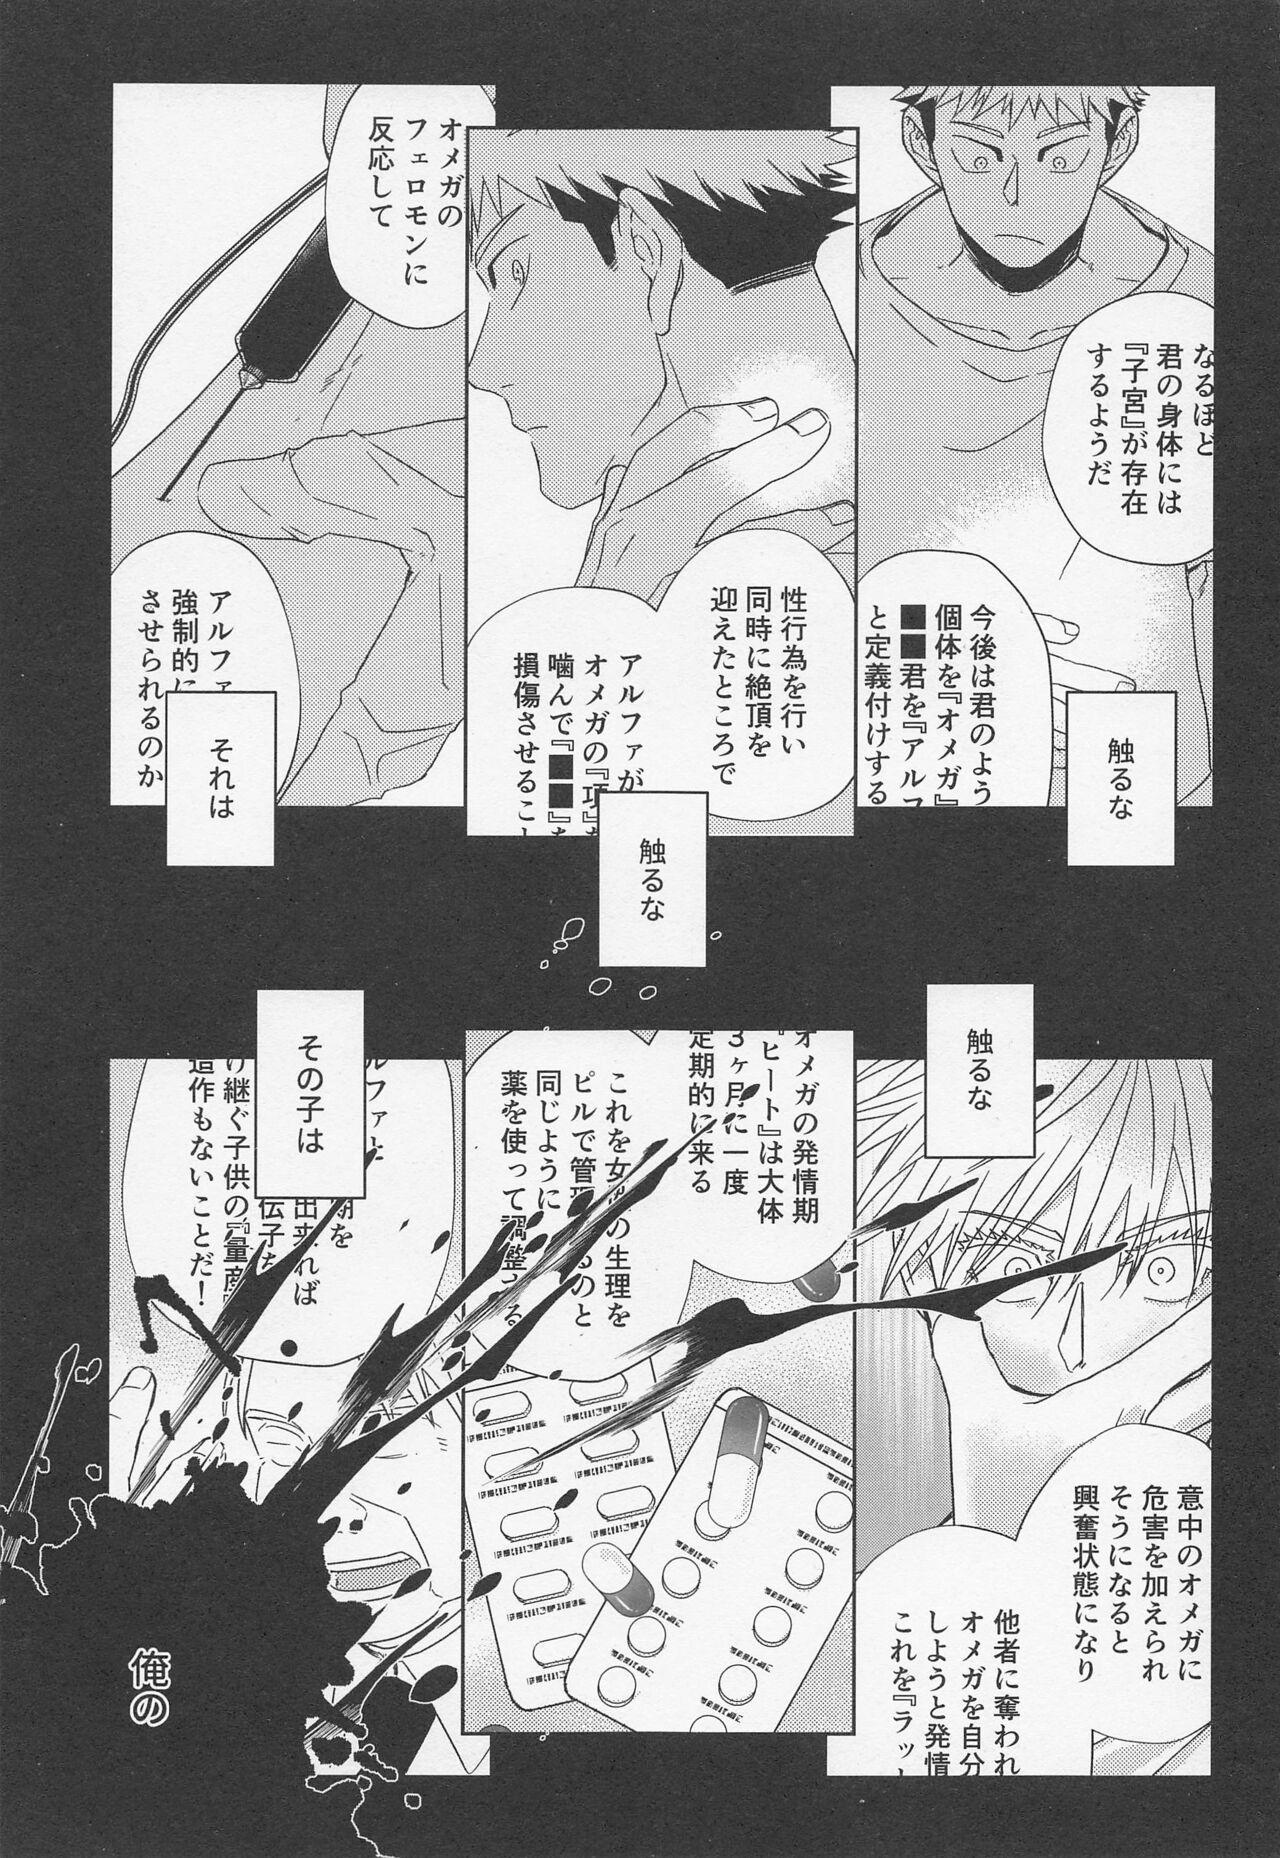 Old Young Fiction/Non-Fiction - Jujutsu kaisen Fucked - Page 8